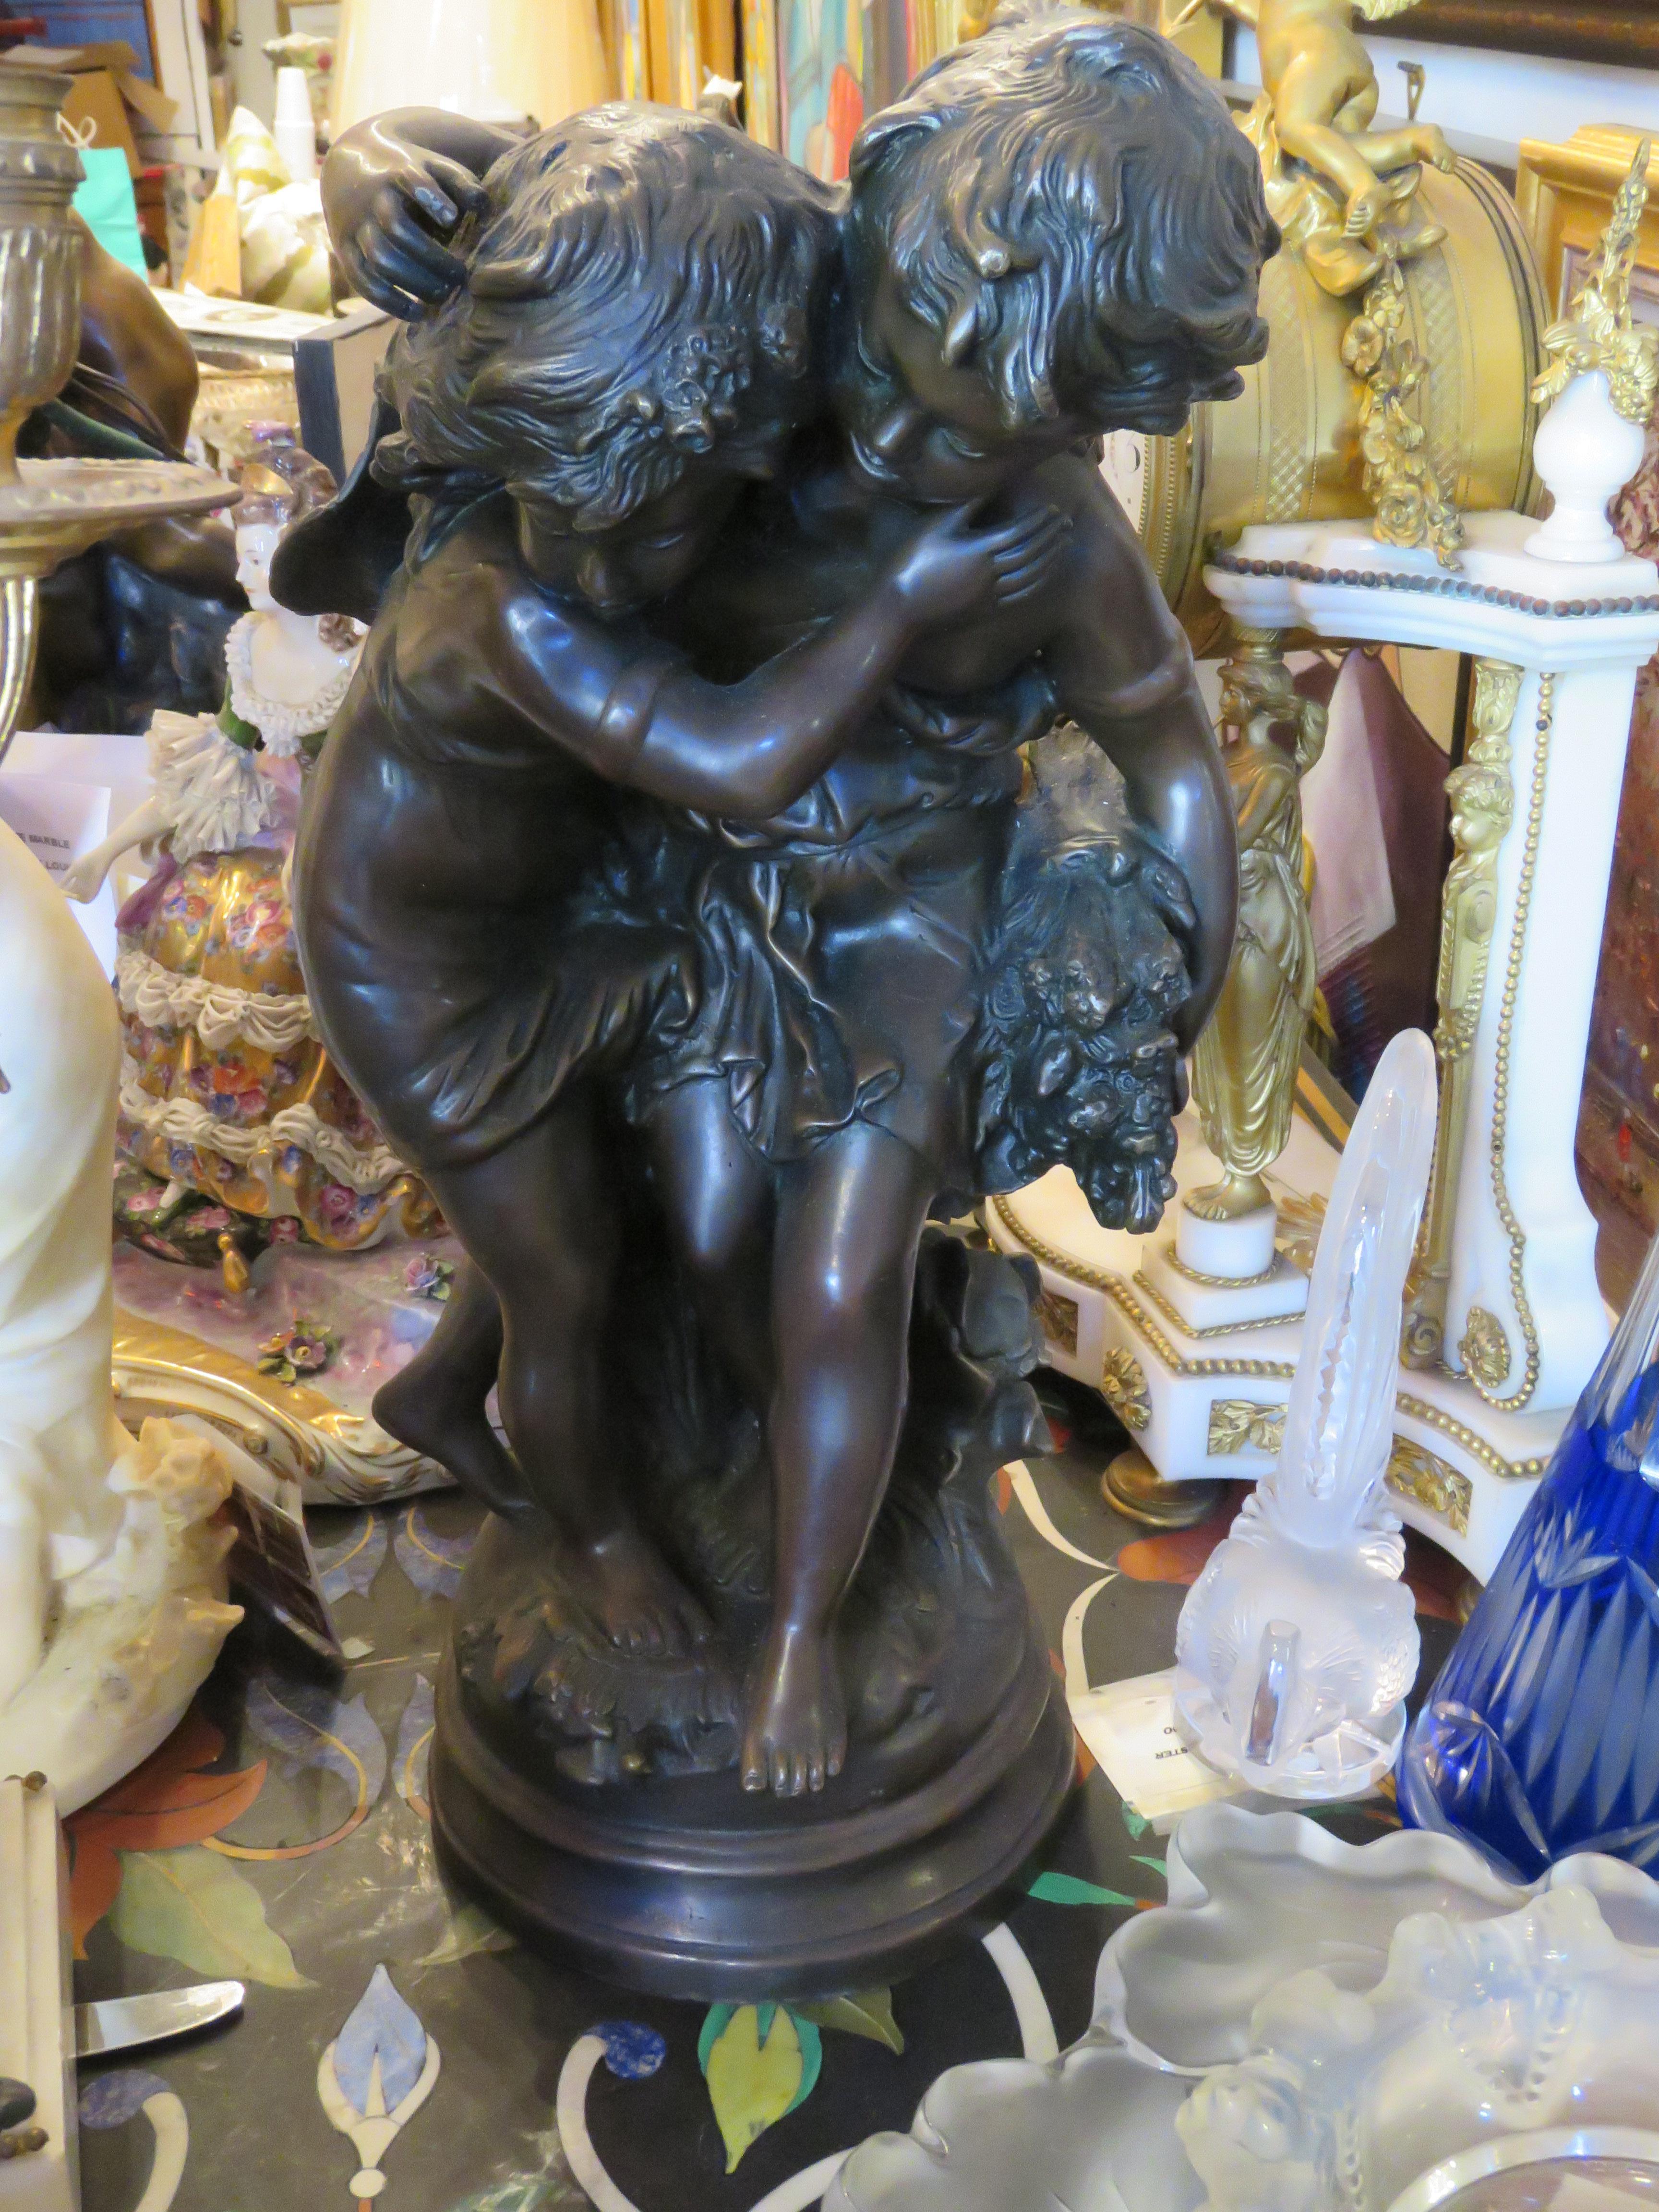 An Exquisite and Beautiful Quality Bronze of a Young Girl and Boy Embracing and Holding each other. An Outstanding Masterpiece!!  Taken from a Several Million Dollar Private New York City Estate. A Rare Beauty!!!

Measurements: 18